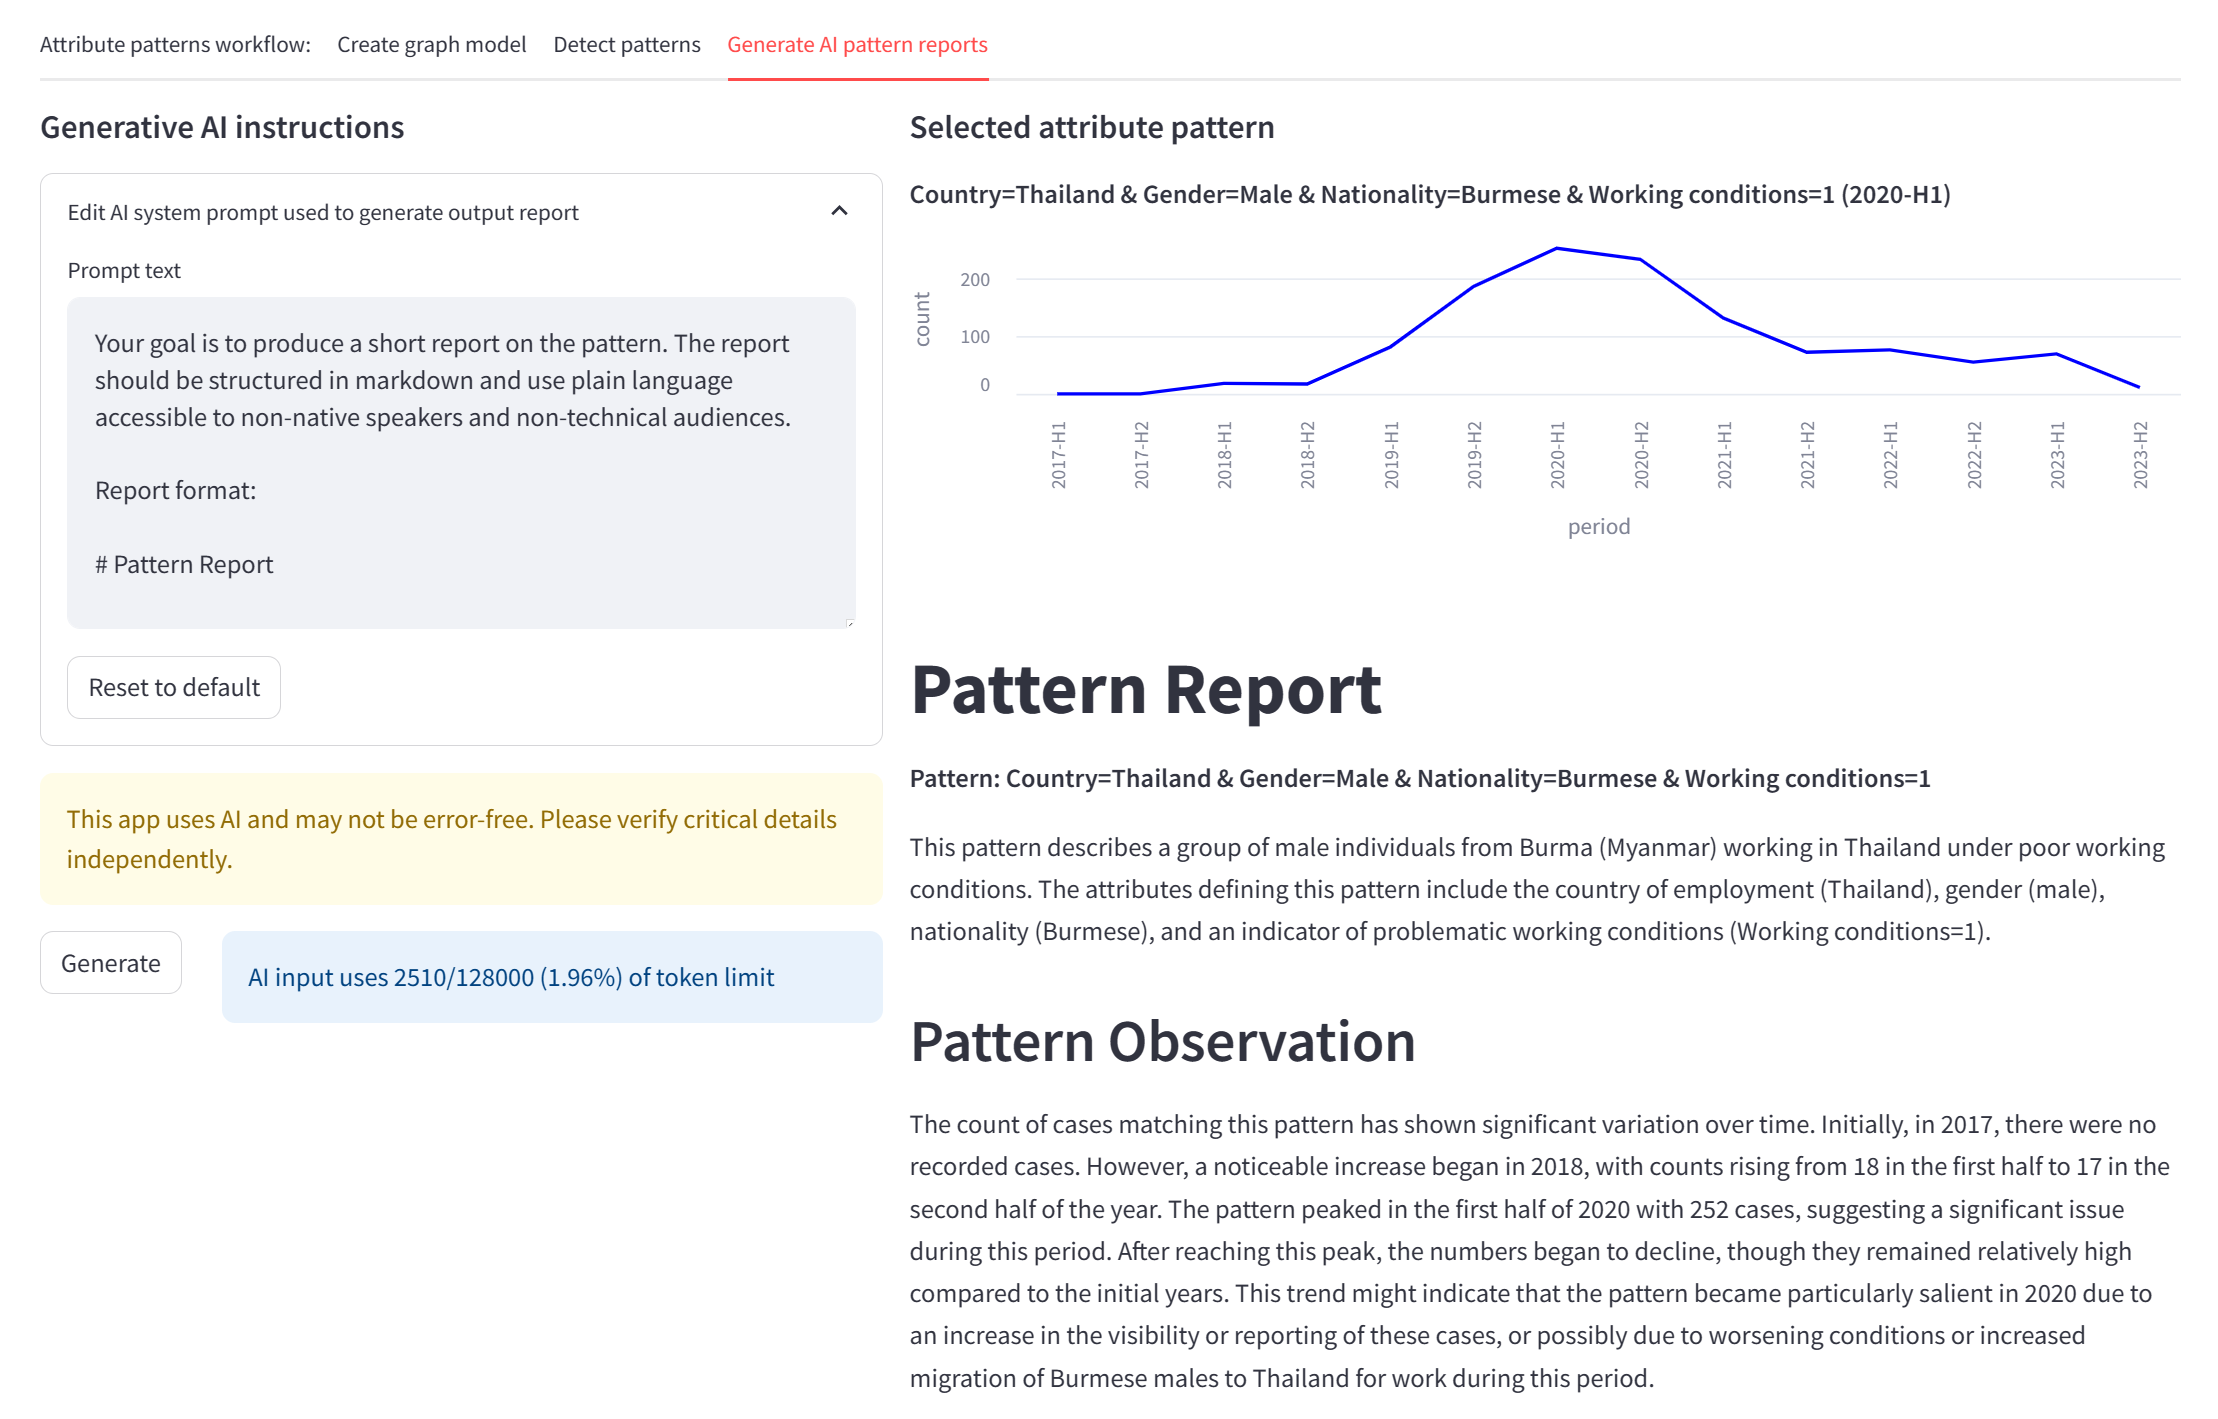 Alt text: Screenshot of Attribute Patterns workflow at the “Generate AI pattern reports” stage. The target dataset is Issara worker voice data. The selected attribute pattern shows a peak in the first half of 2020 for Burmese males experiencing working conditions issues in Thailand. The AI-generated pattern report explains this pattern in narrative form, and the editable prompt text allows the user to customize the nature of such pattern reports.  